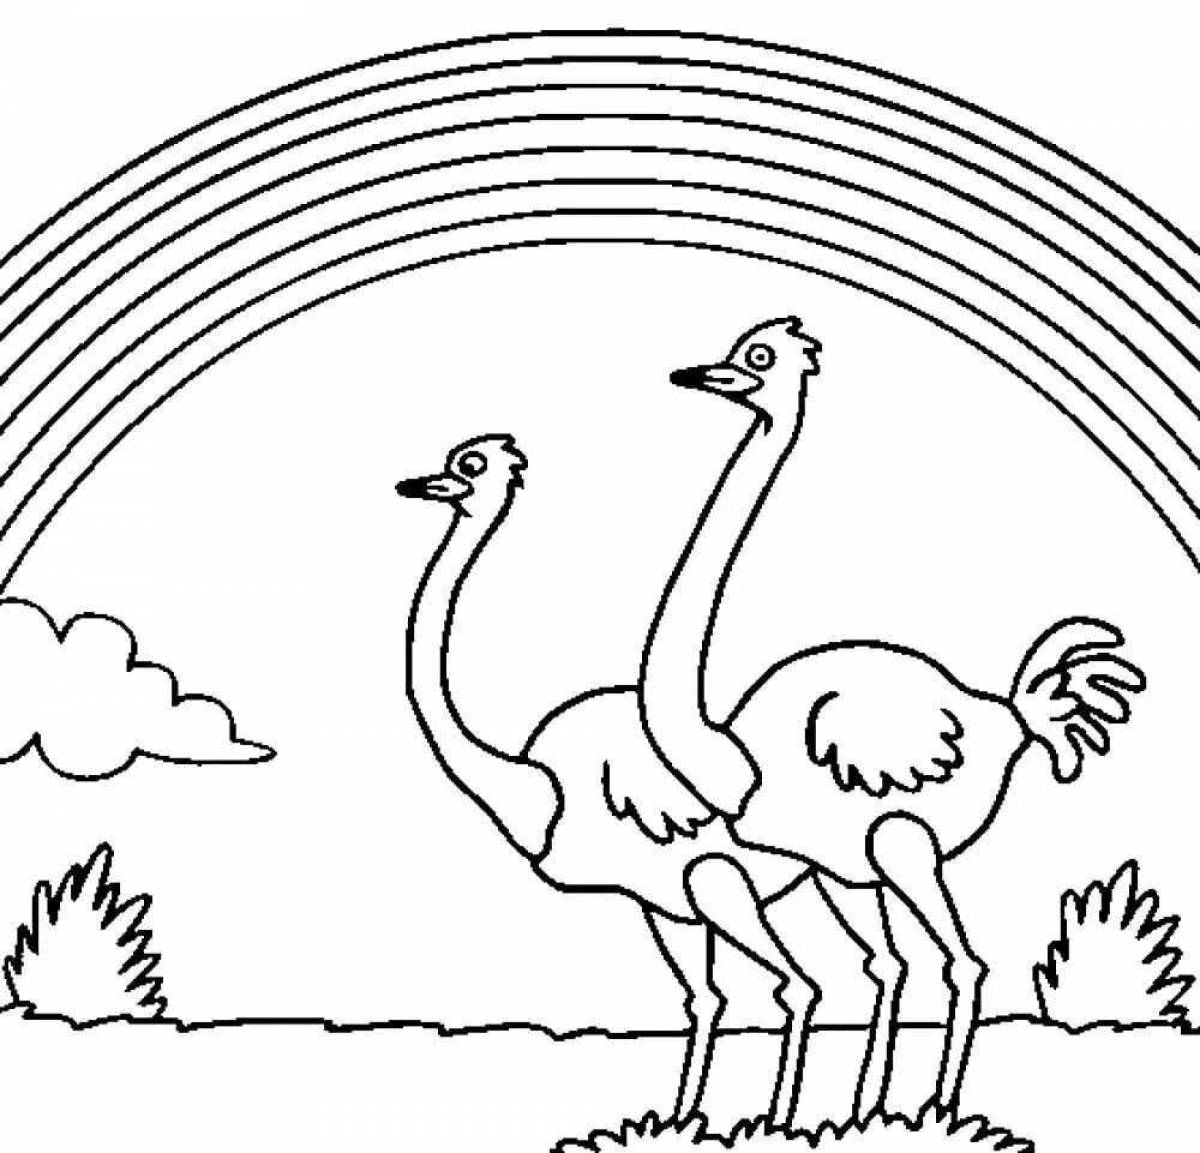 Amazing ostrich coloring page for kids